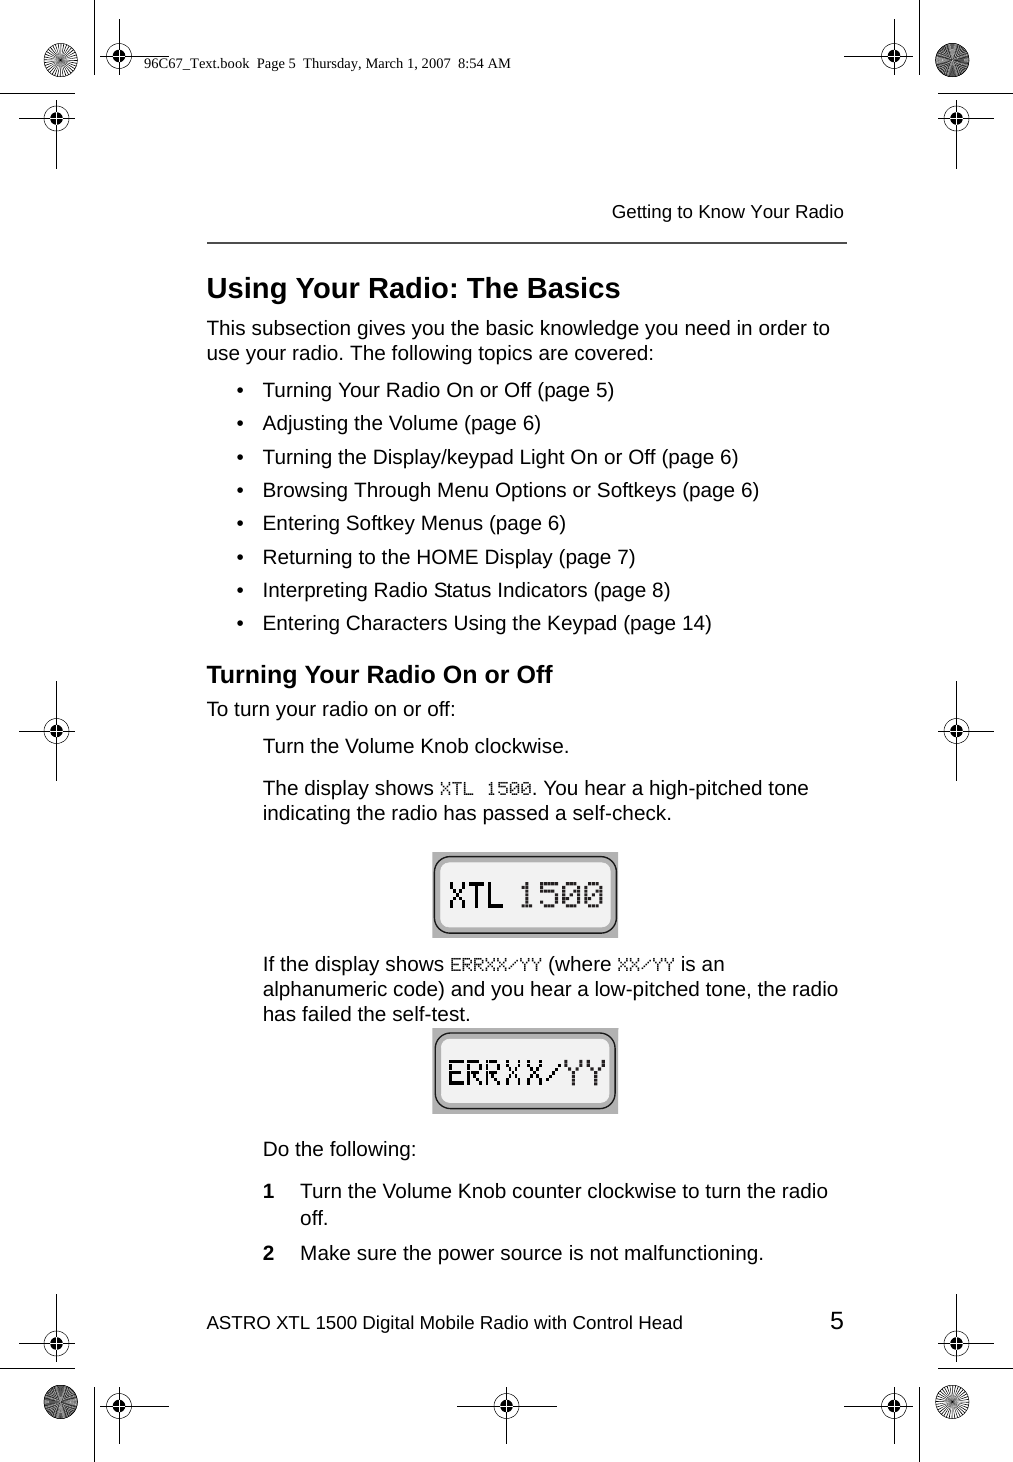 ASTRO XTL 1500 Digital Mobile Radio with Control Head 5Getting to Know Your RadioUsing Your Radio: The BasicsThis subsection gives you the basic knowledge you need in order to use your radio. The following topics are covered:• Turning Your Radio On or Off (page 5)• Adjusting the Volume (page 6)• Turning the Display/keypad Light On or Off (page 6)• Browsing Through Menu Options or Softkeys (page 6)• Entering Softkey Menus (page 6)• Returning to the HOME Display (page 7)• Interpreting Radio Status Indicators (page 8)• Entering Characters Using the Keypad (page 14)Turning Your Radio On or OffTo turn your radio on or off:Turn the Volume Knob clockwise. The display shows XTL 1500. You hear a high-pitched tone indicating the radio has passed a self-check.If the display shows ERRXX/YY (where XX/YY is an alphanumeric code) and you hear a low-pitched tone, the radio has failed the self-test.Do the following:1Turn the Volume Knob counter clockwise to turn the radio off.2Make sure the power source is not malfunctioning.96C67_Text.book  Page 5  Thursday, March 1, 2007  8:54 AM